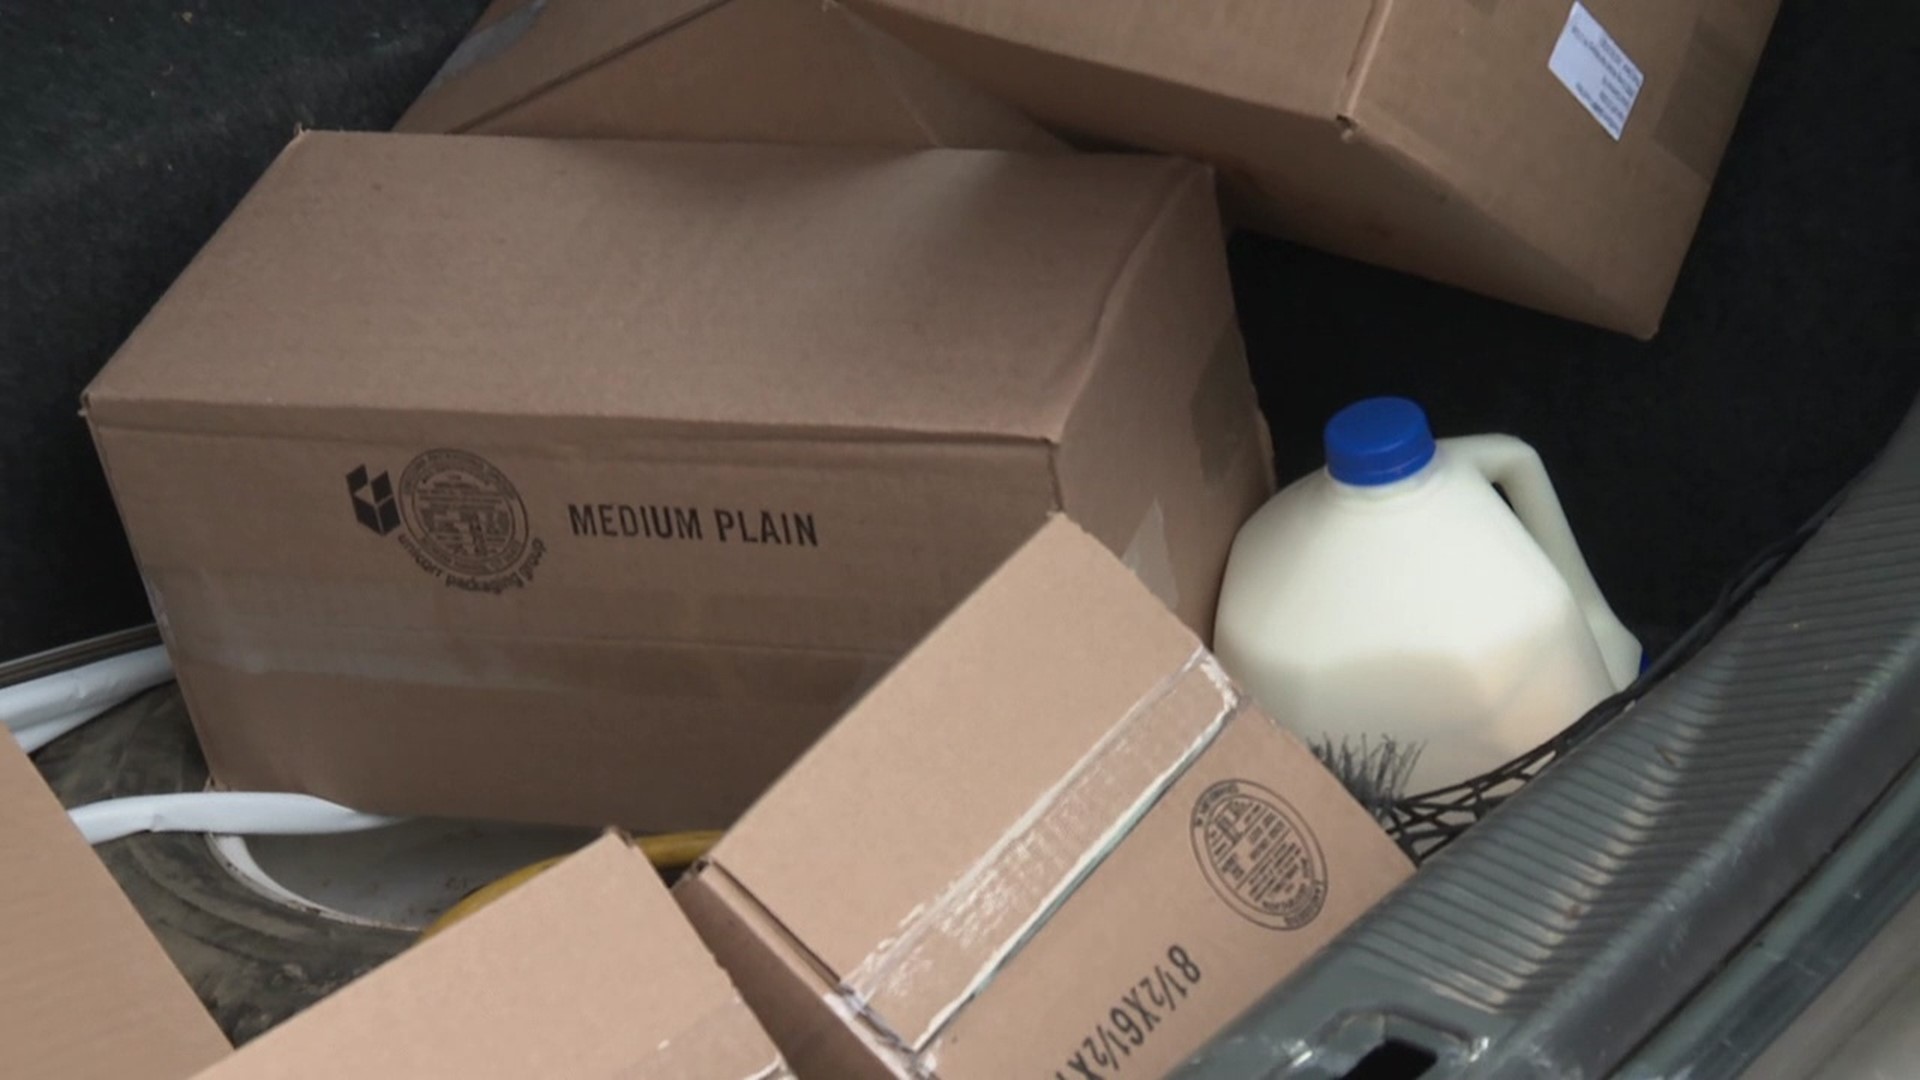 27,000 pounds of meat, produce, and dairy products were given away through the Coronavirus Food Assistance Program.